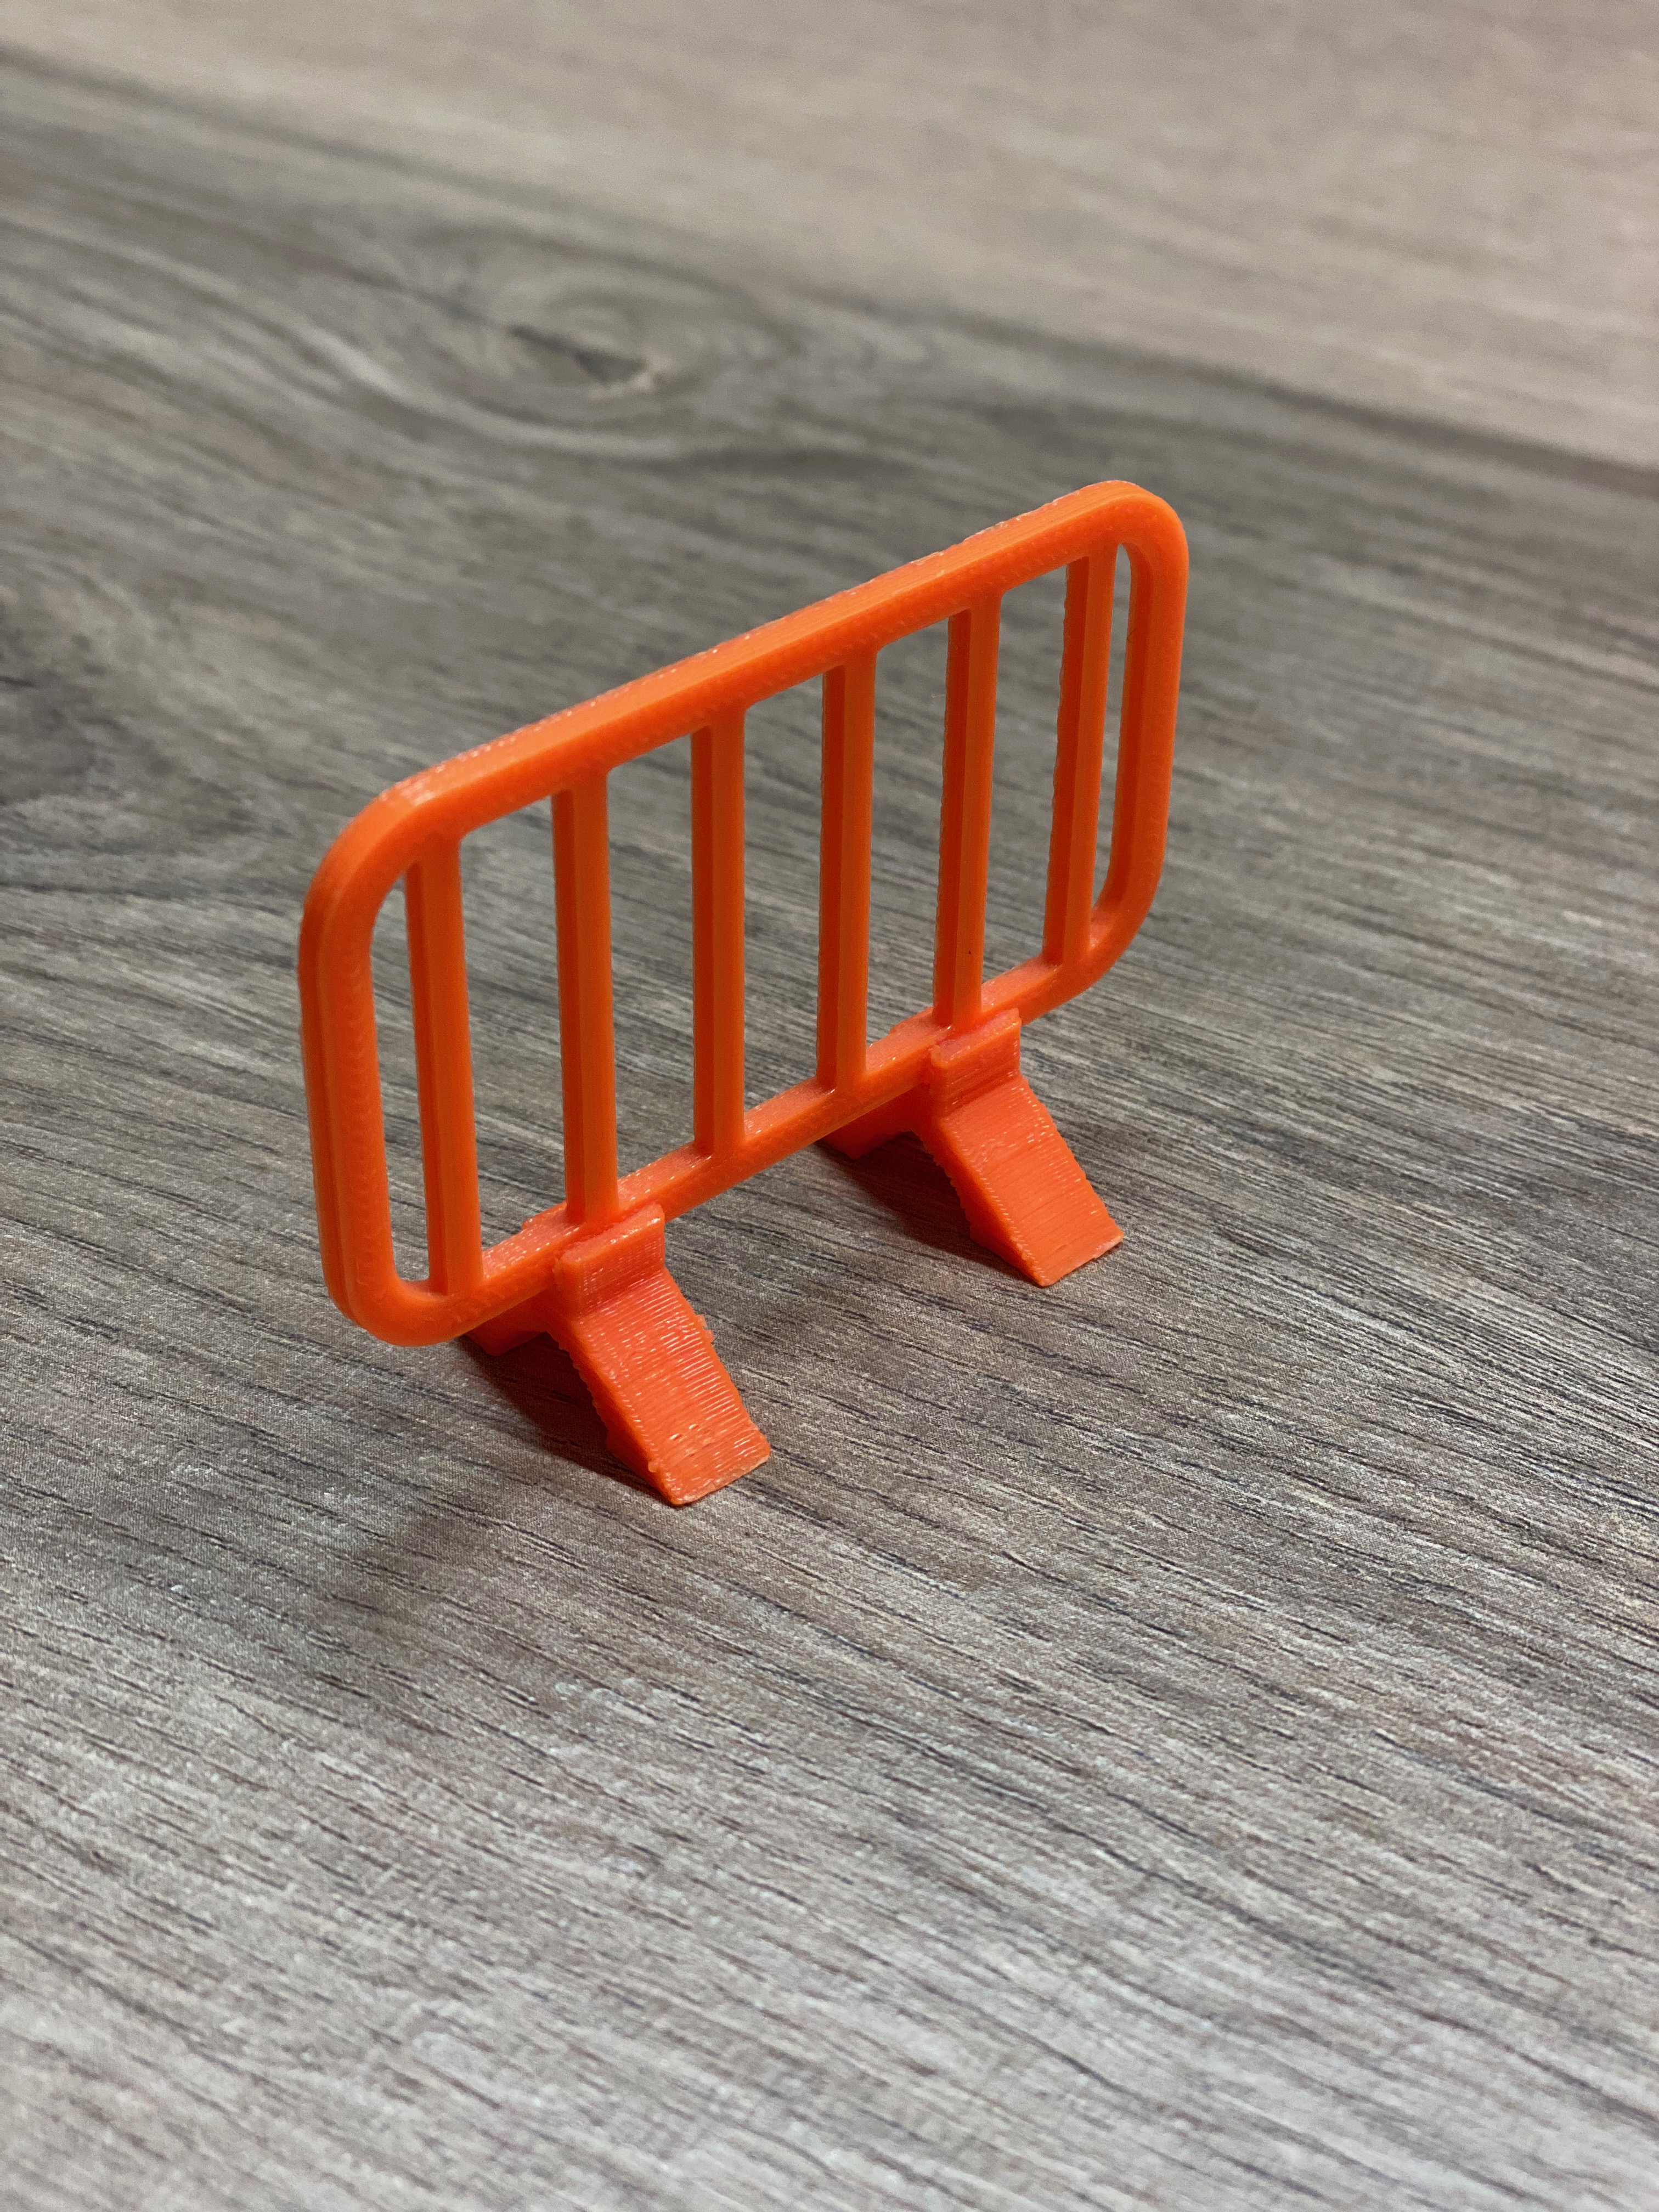 Playmobil (or similar toys) mobile security fence